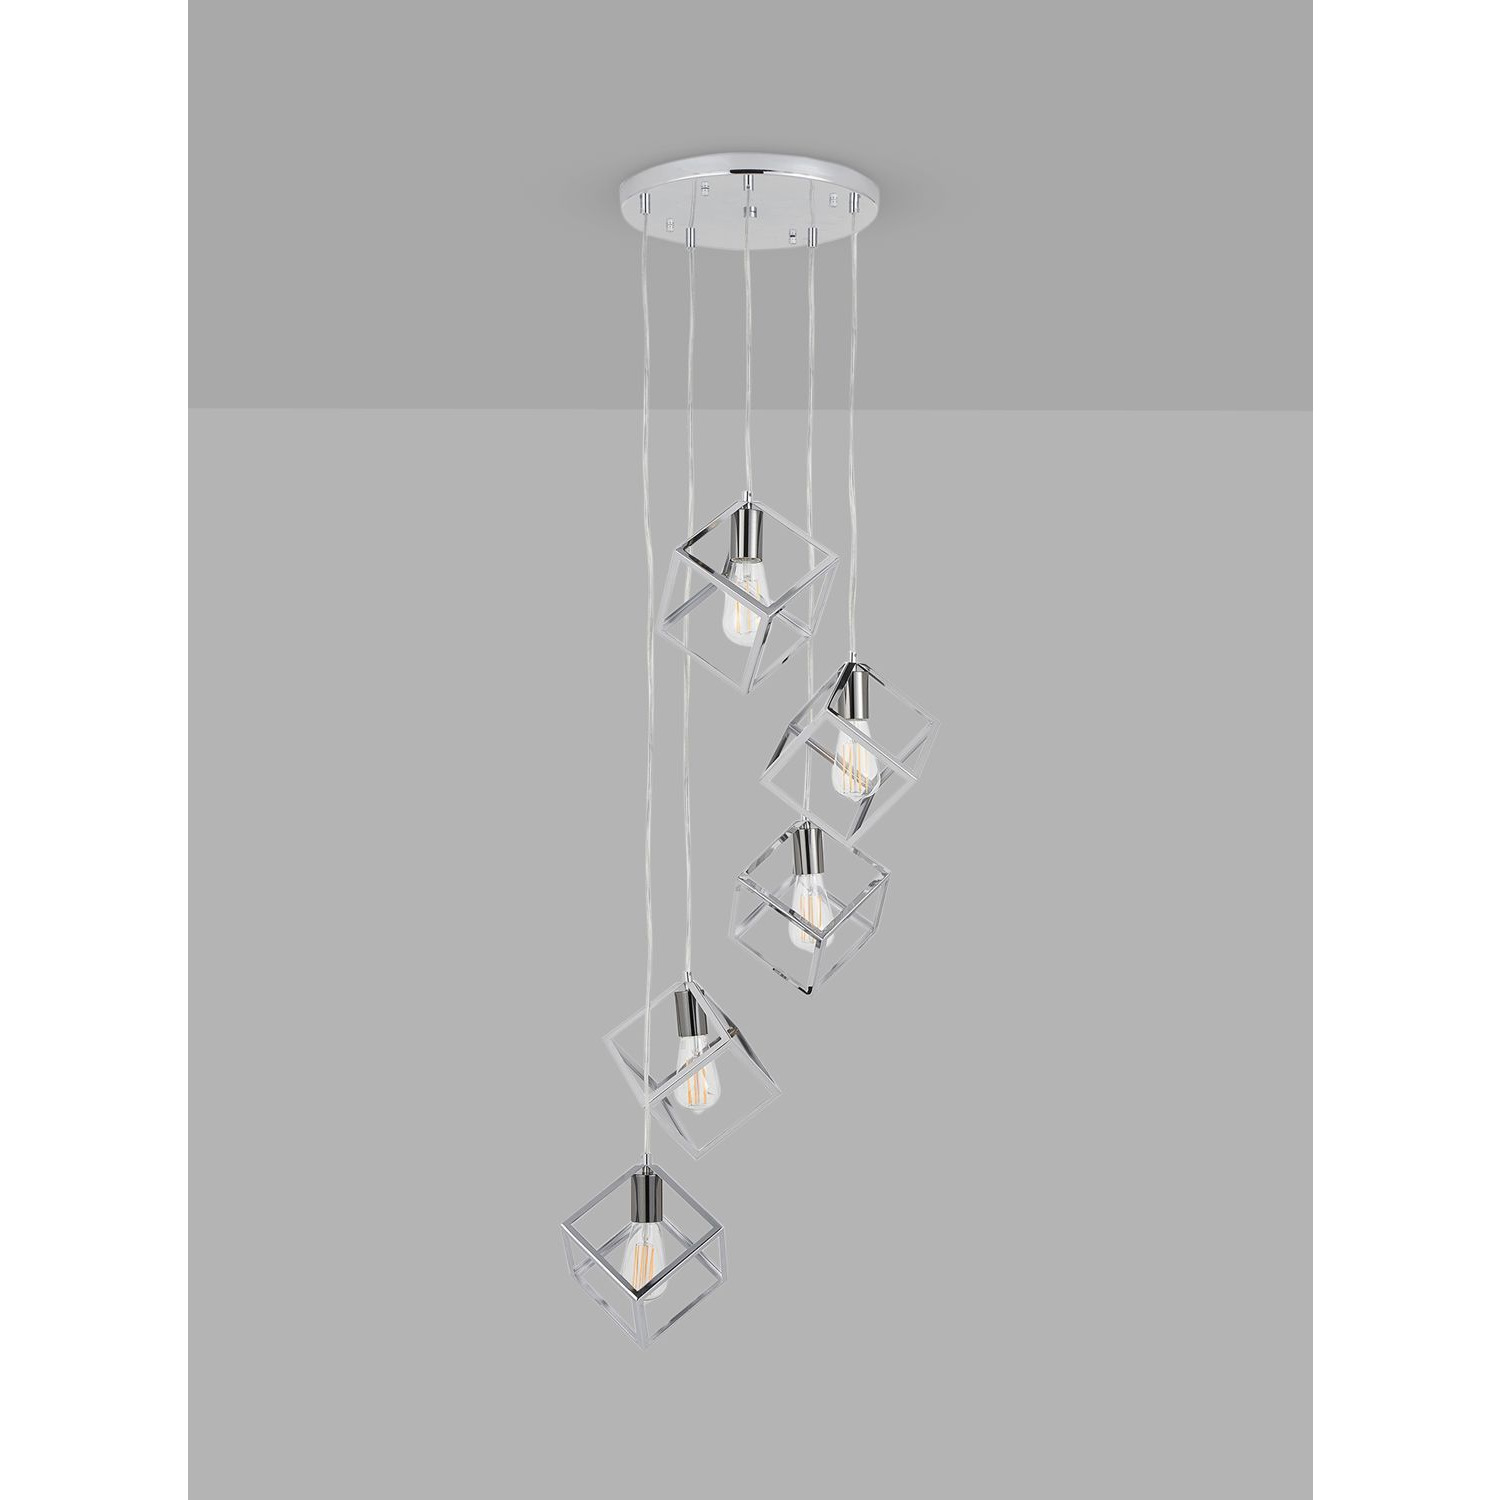 Pacific Lifestyle Alessio 5 Pendant Cluster Ceiling Light, Nickel - image 1